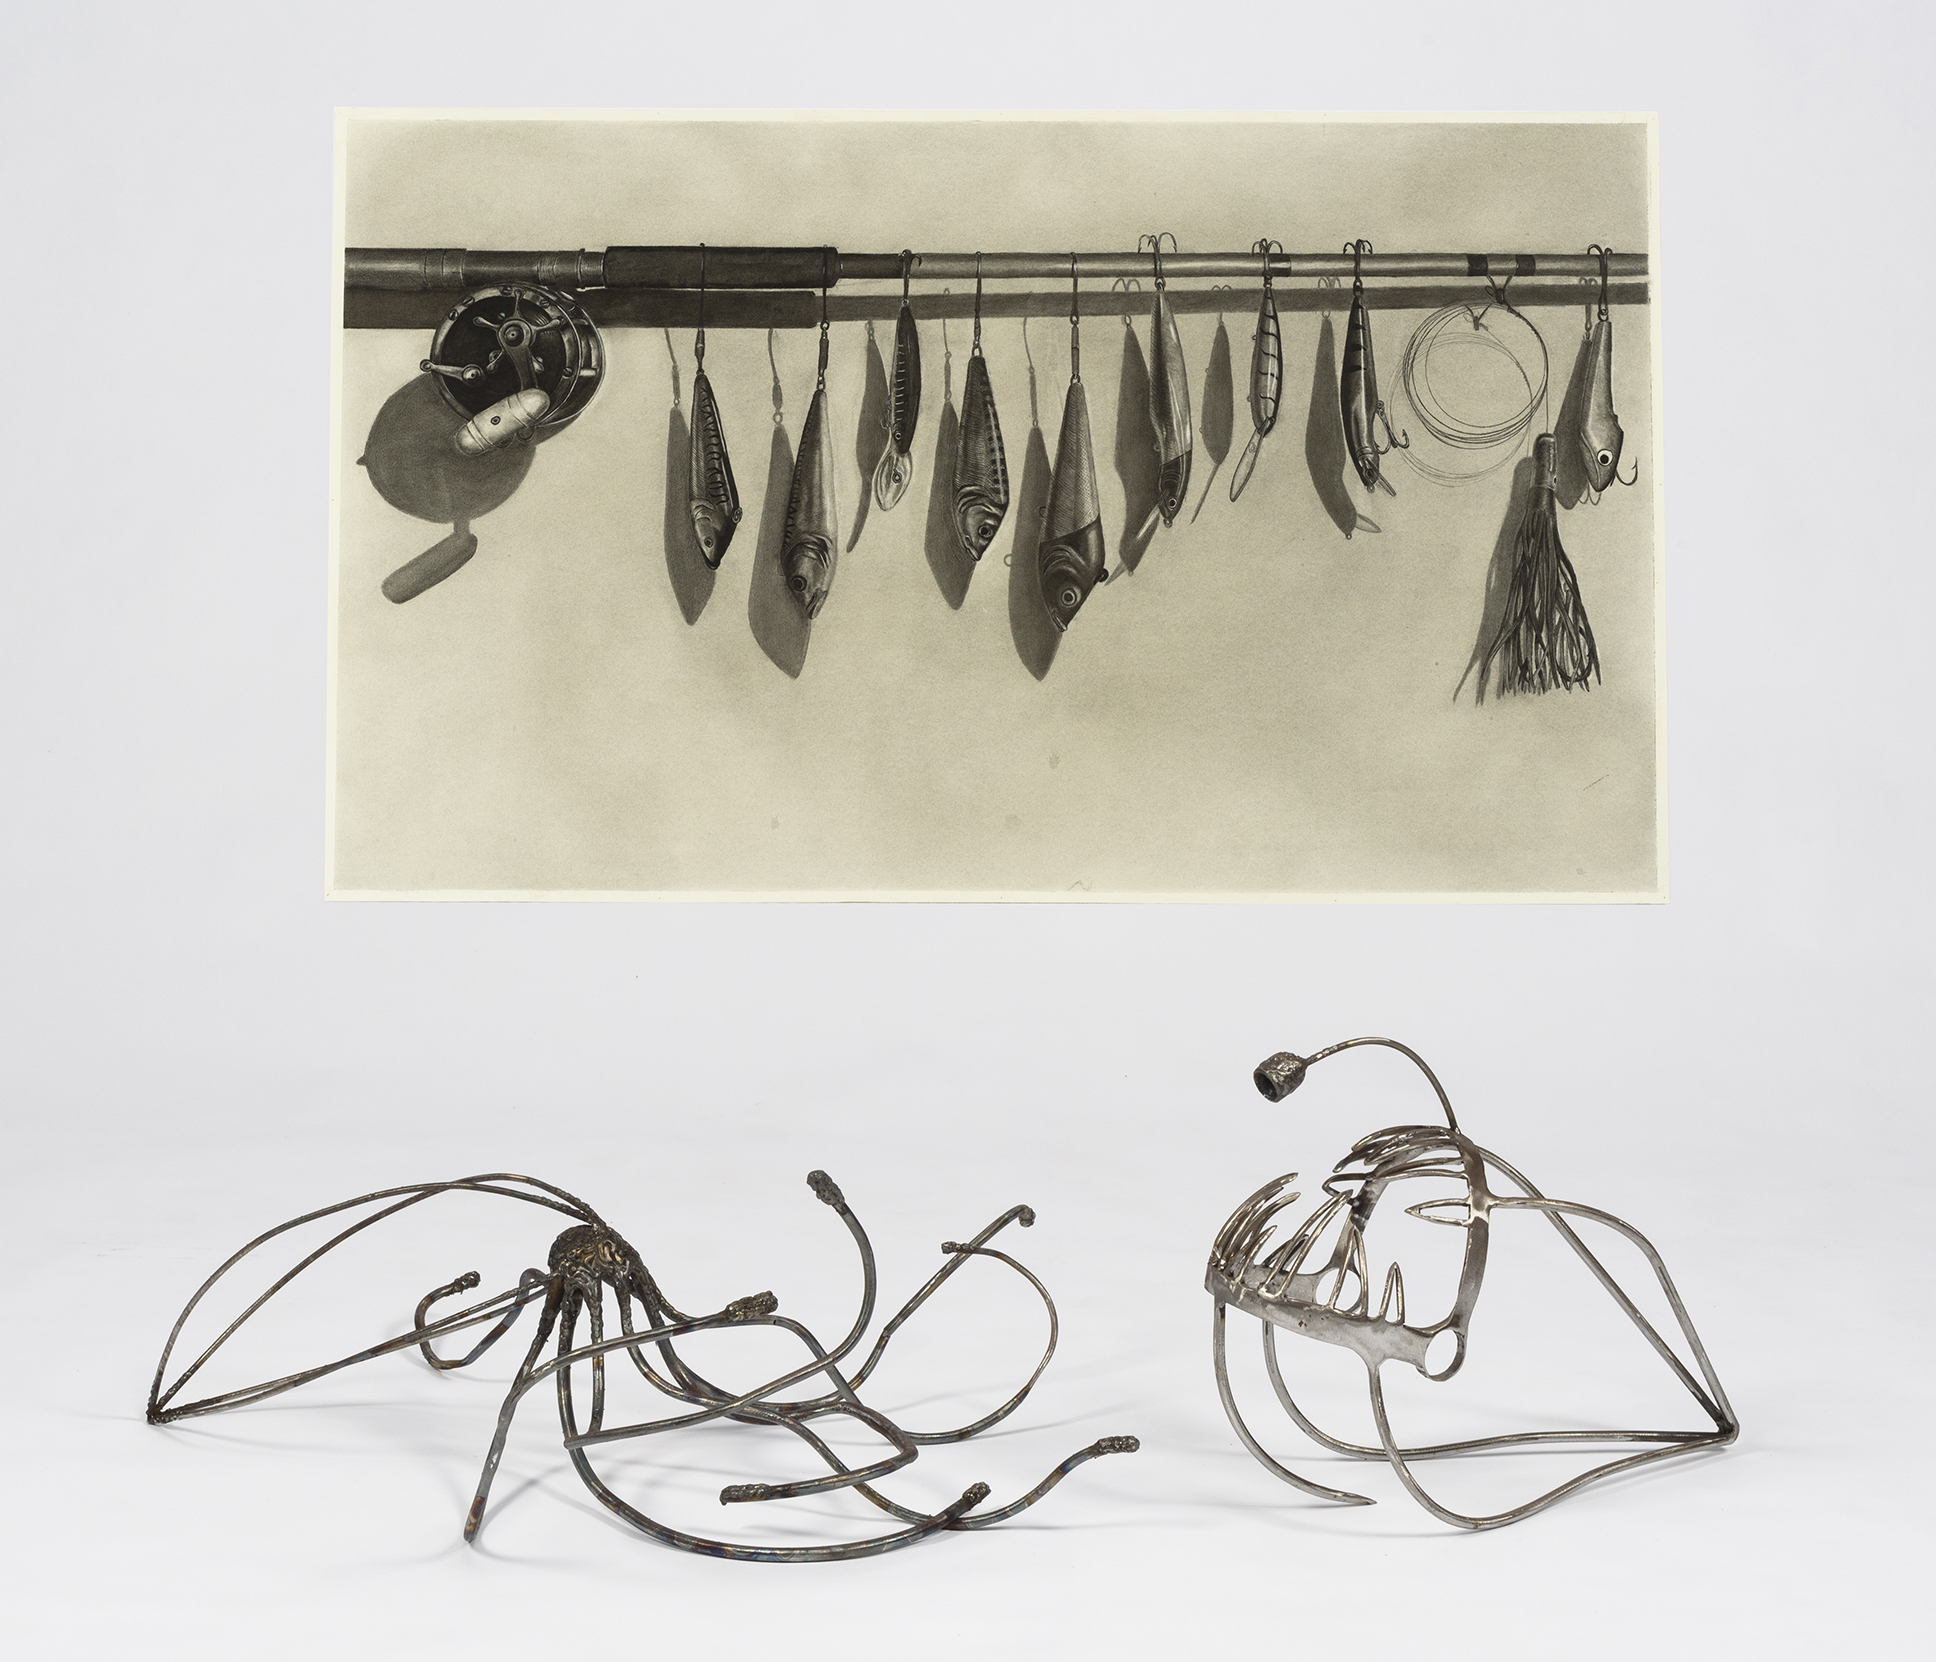 A charcoal drawing and two metal sculptures that resemble an octopus and an angler fish.